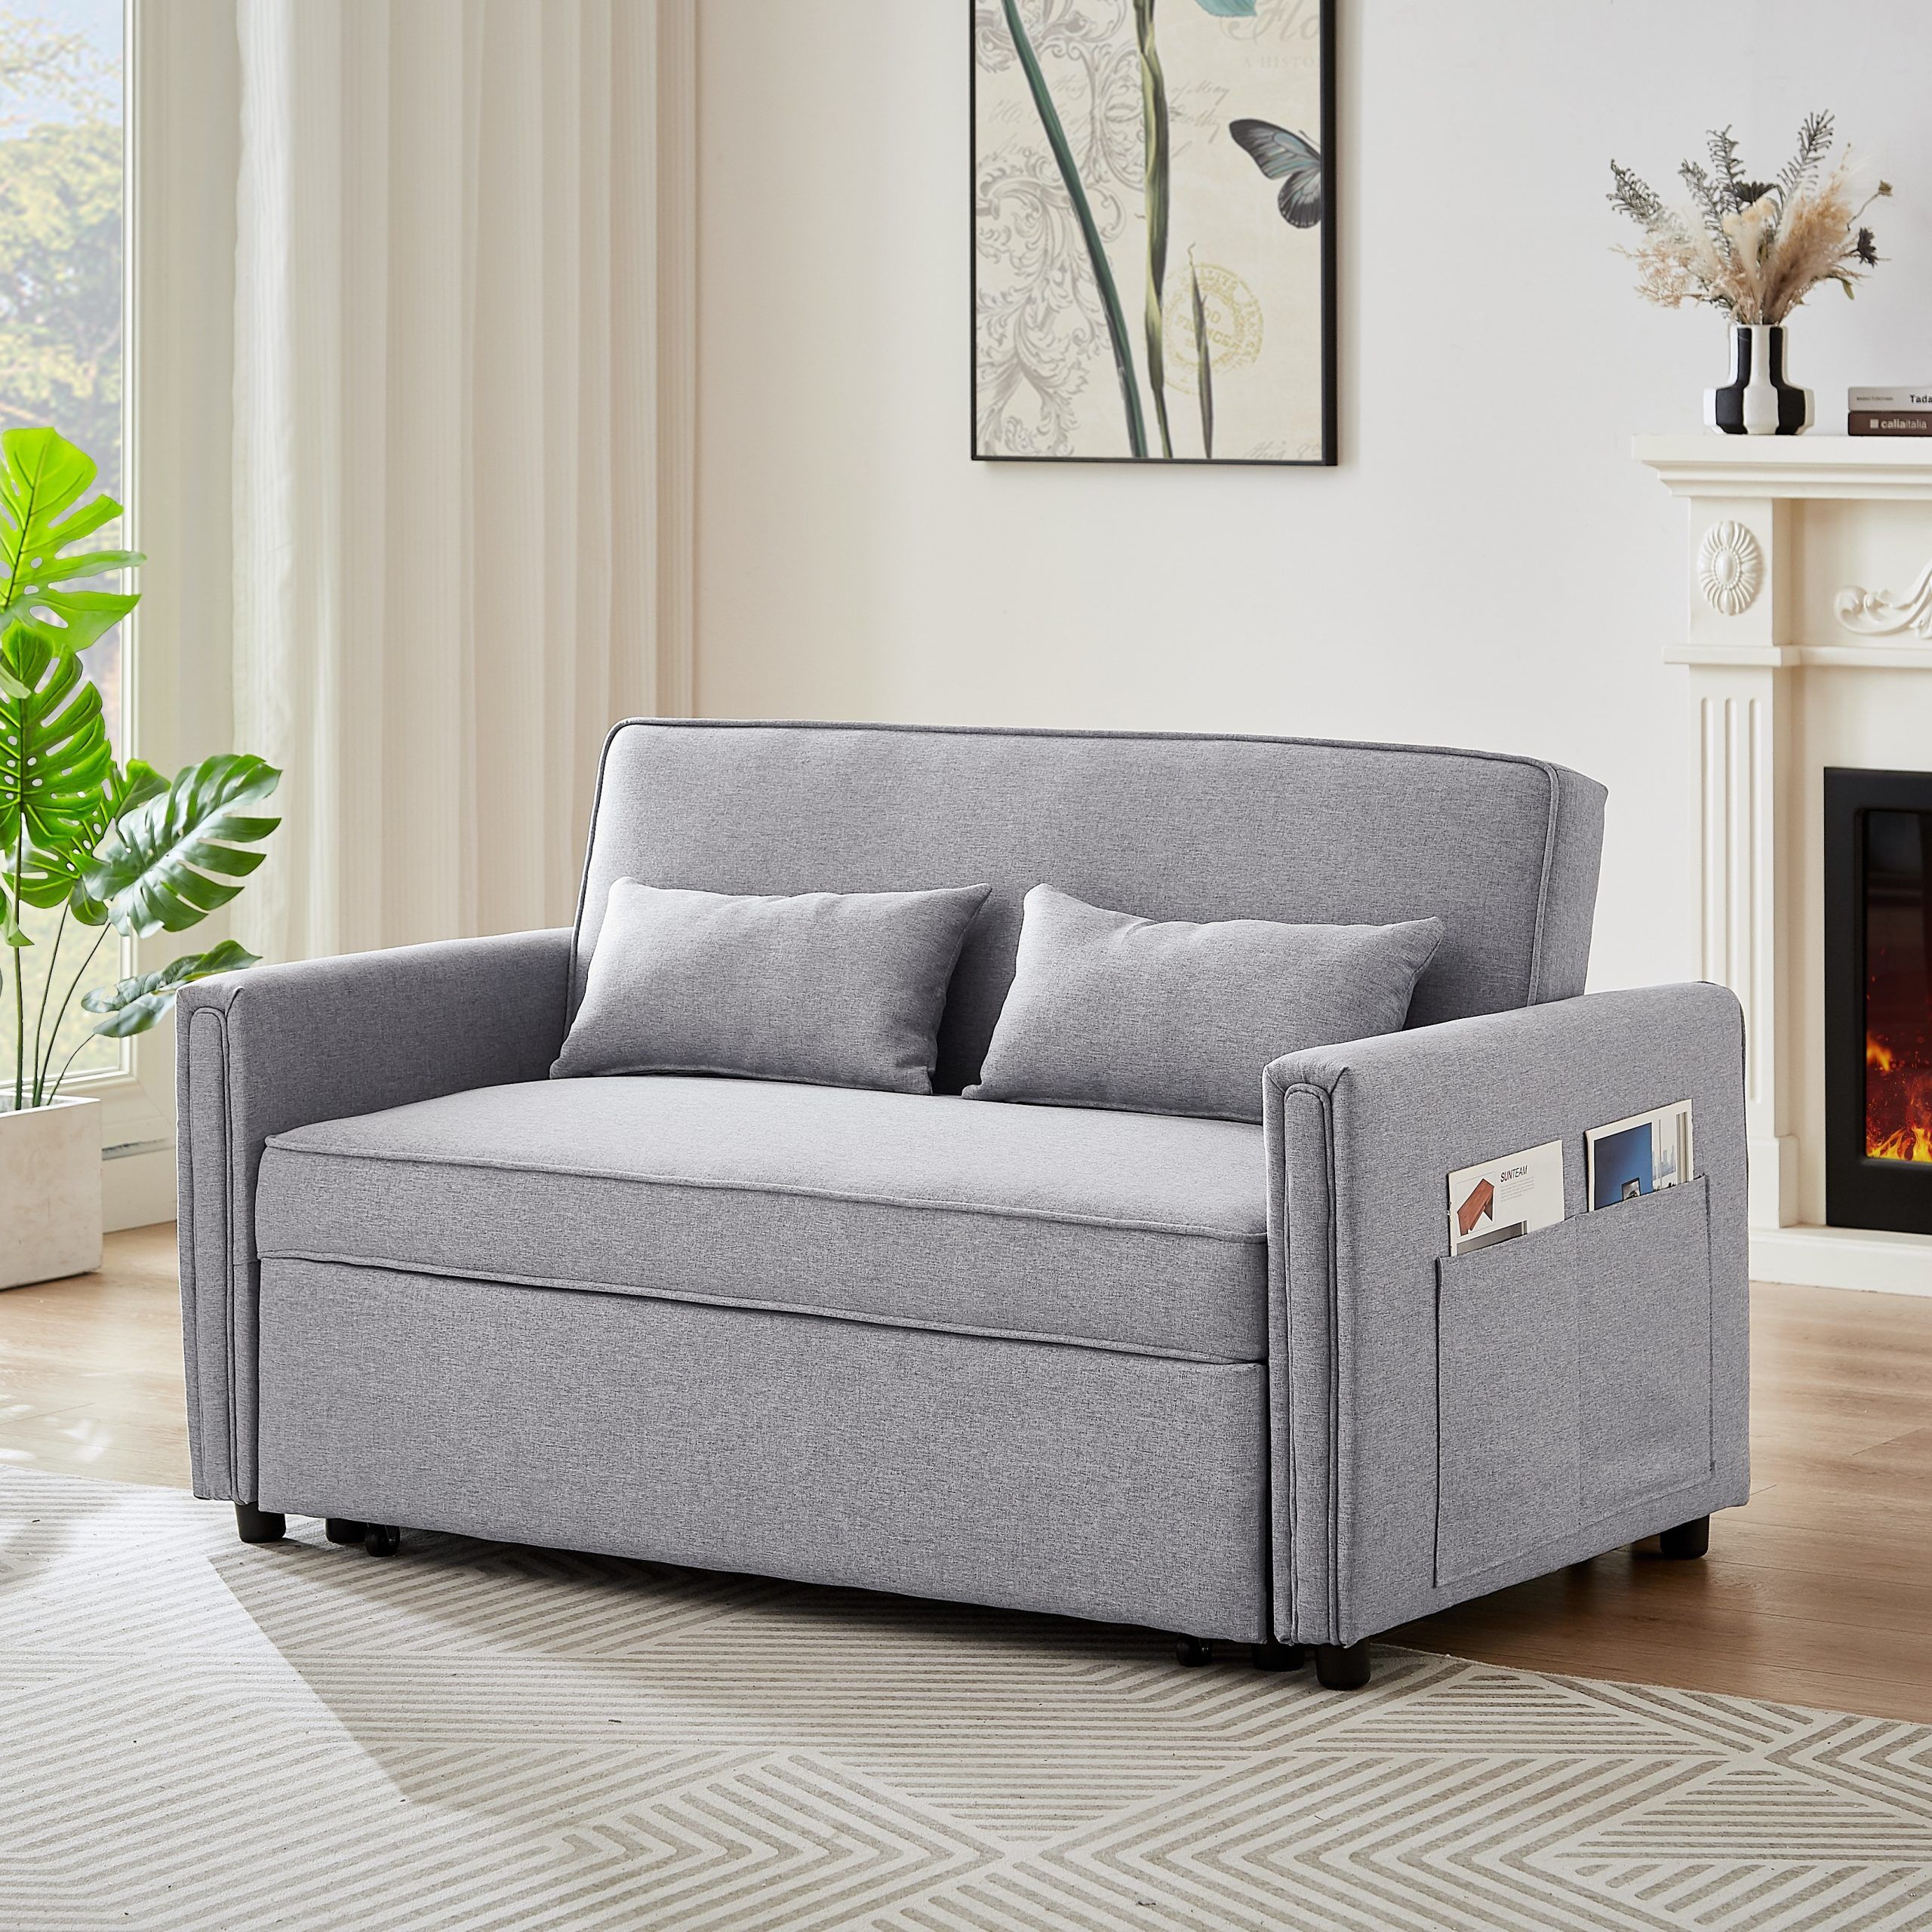 Modern Linen Convertible Loveseat Sleeper Sofa Couch With Adjustable  Backrest, Pull Out Bed And 2 Lumbar Pillows, Grey – Bed Bath & Beyond –  38373427 In Convertible Gray Loveseat Sleepers (View 3 of 15)